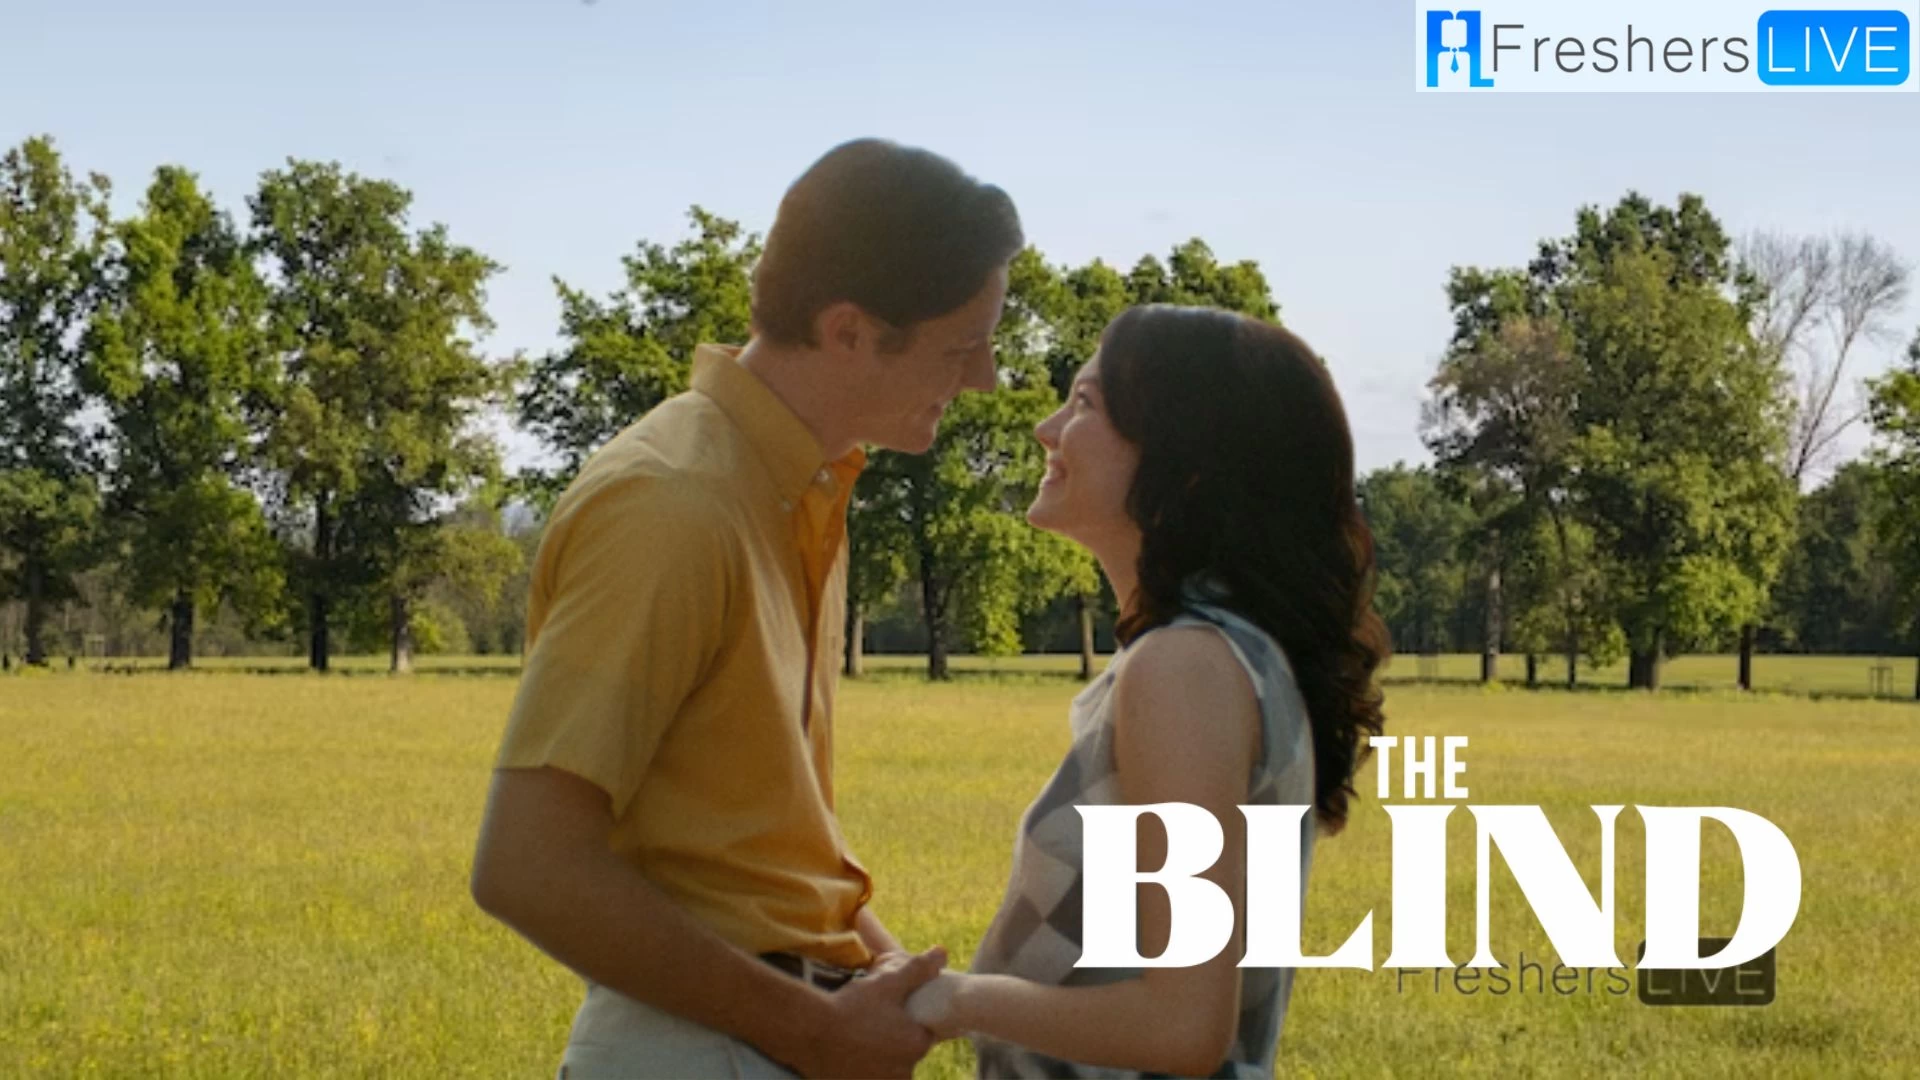 Will The Blind Movie be in Theaters? How Long Will The Blind Be in Theaters?